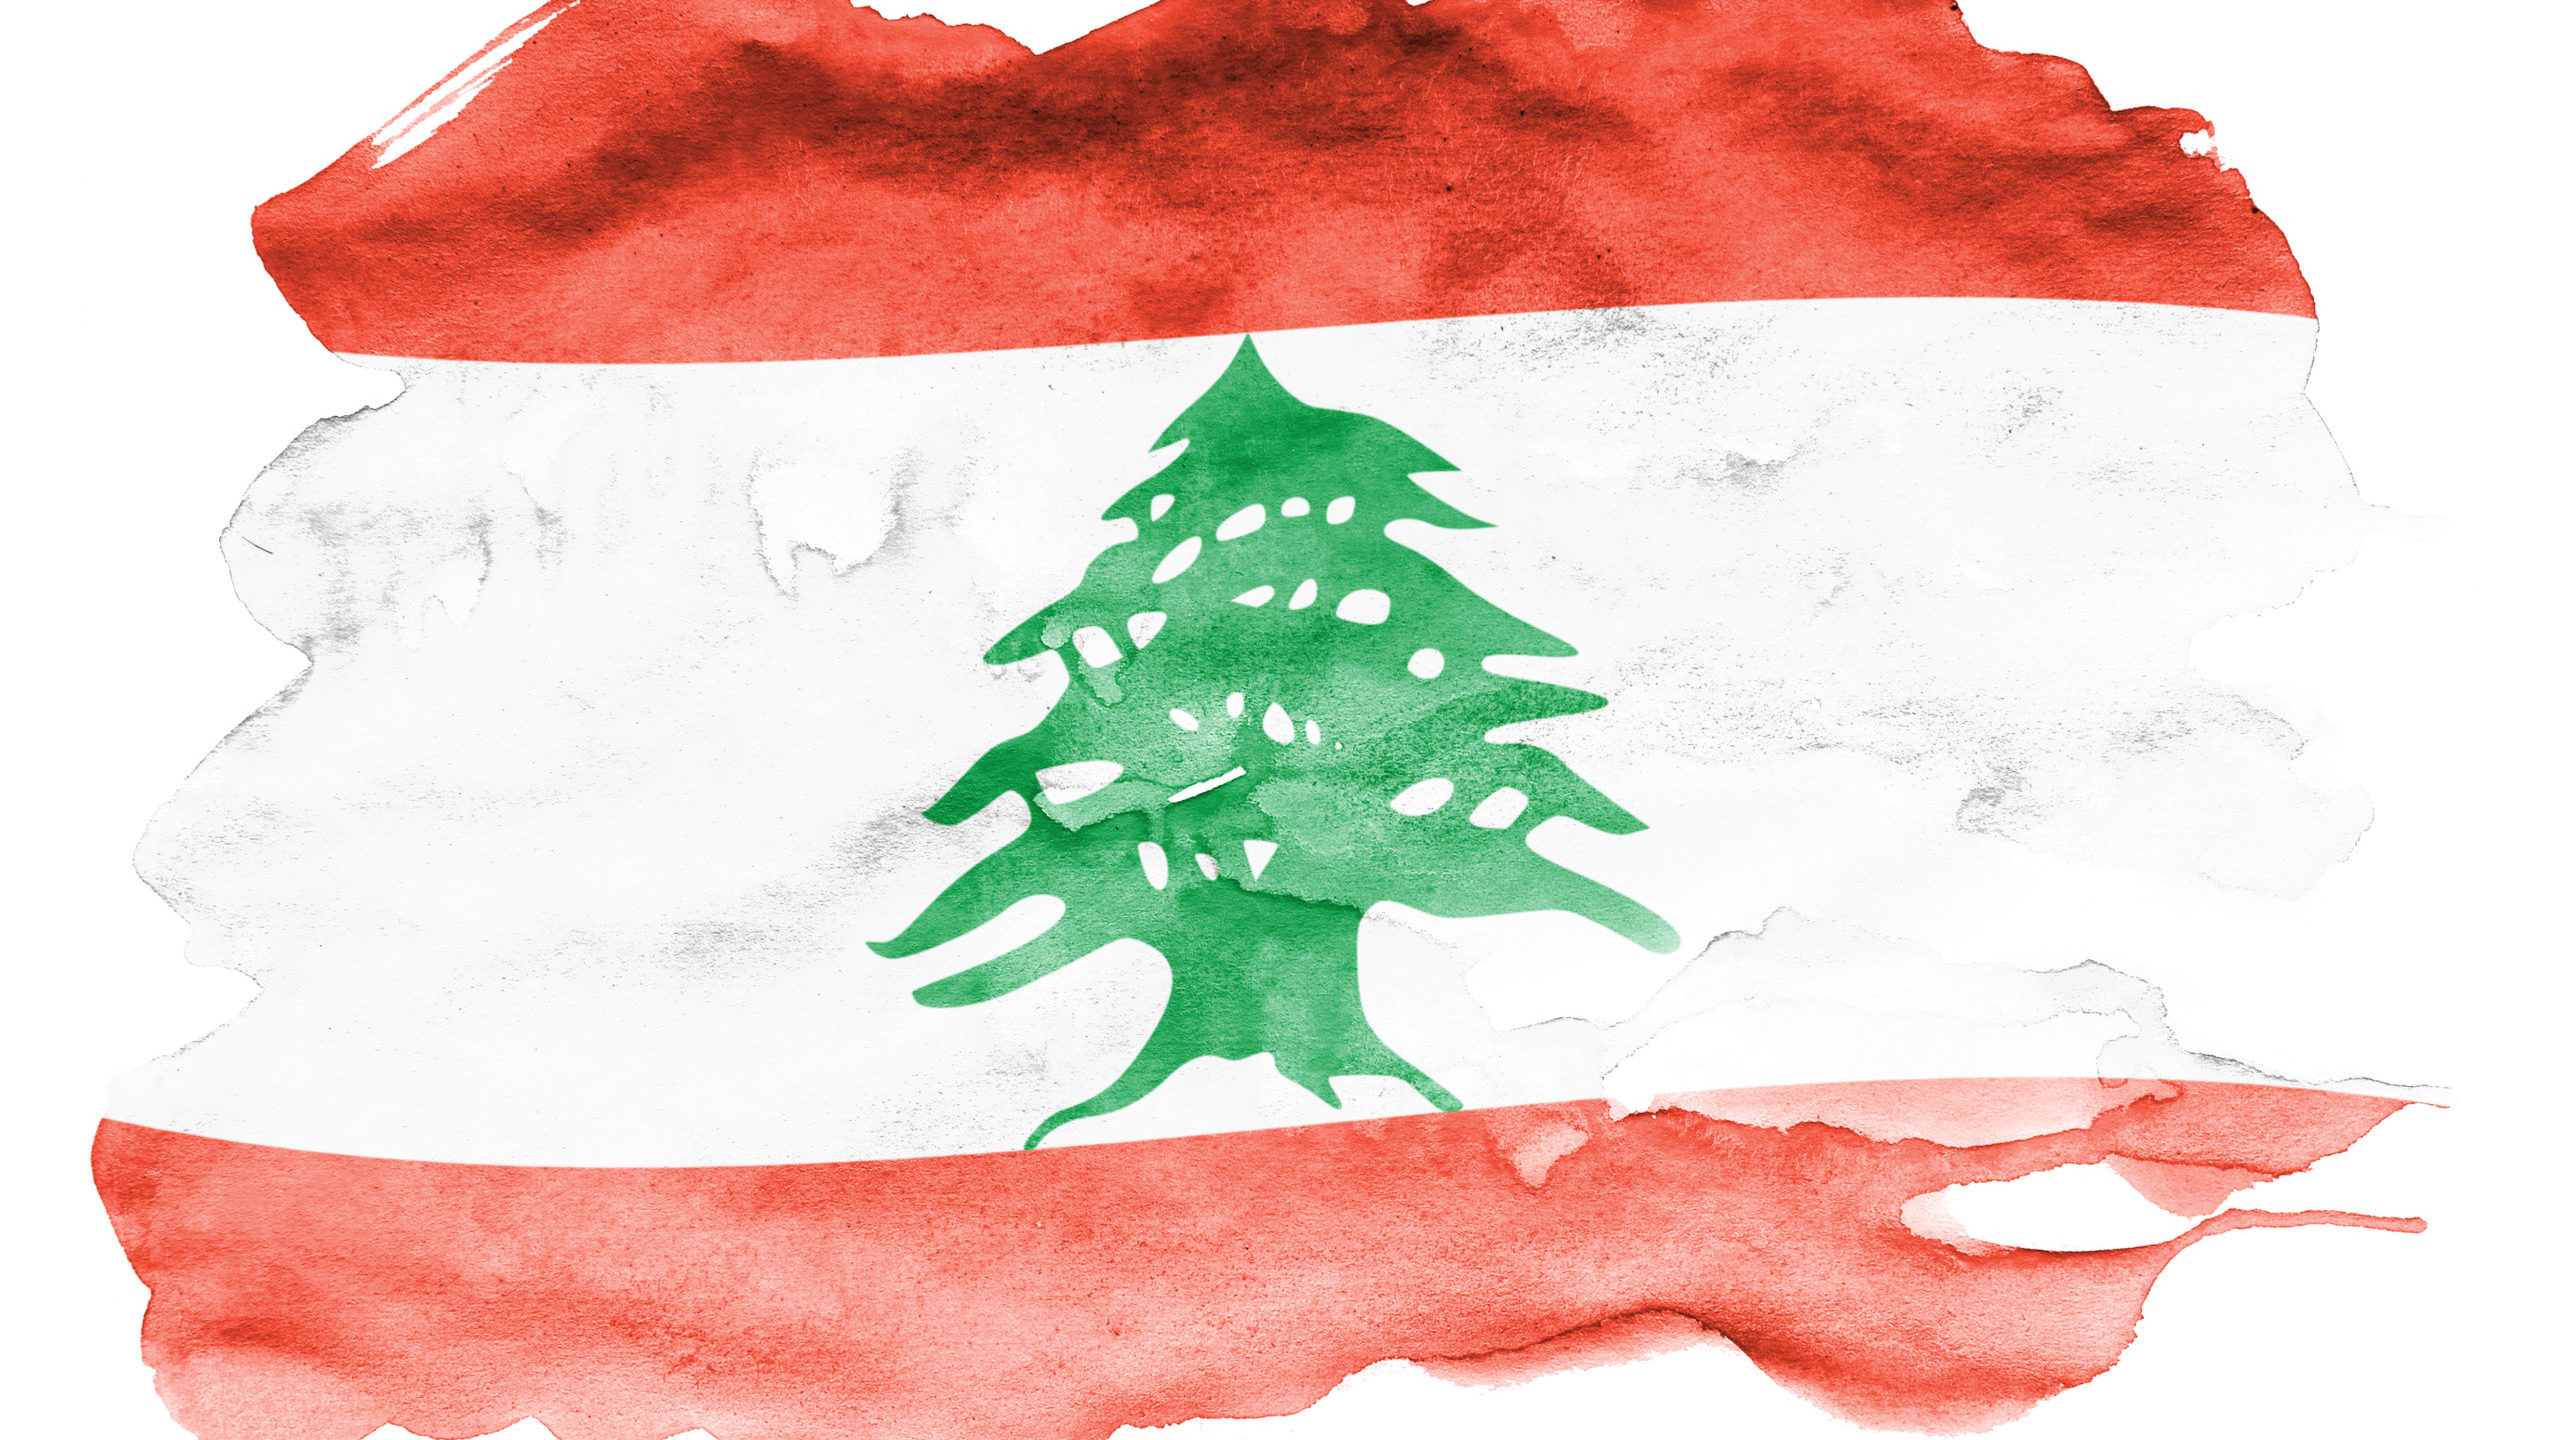 After Scathing World Bank Report, Lebanon’s Political Crisis Shows No Signs of Easing